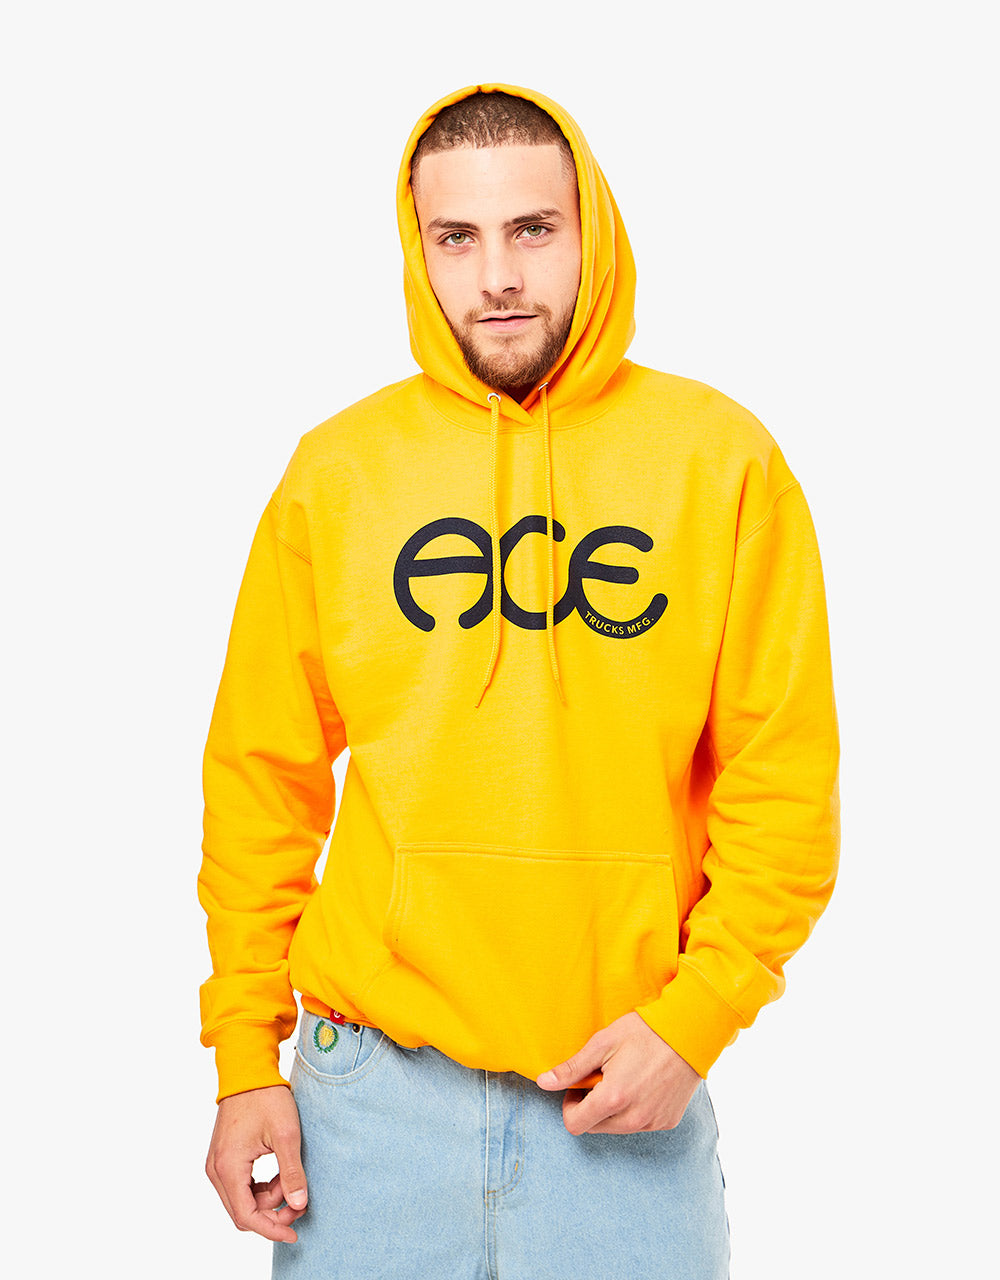 Ace Trucks Rings Pullover Hoodie - Gold